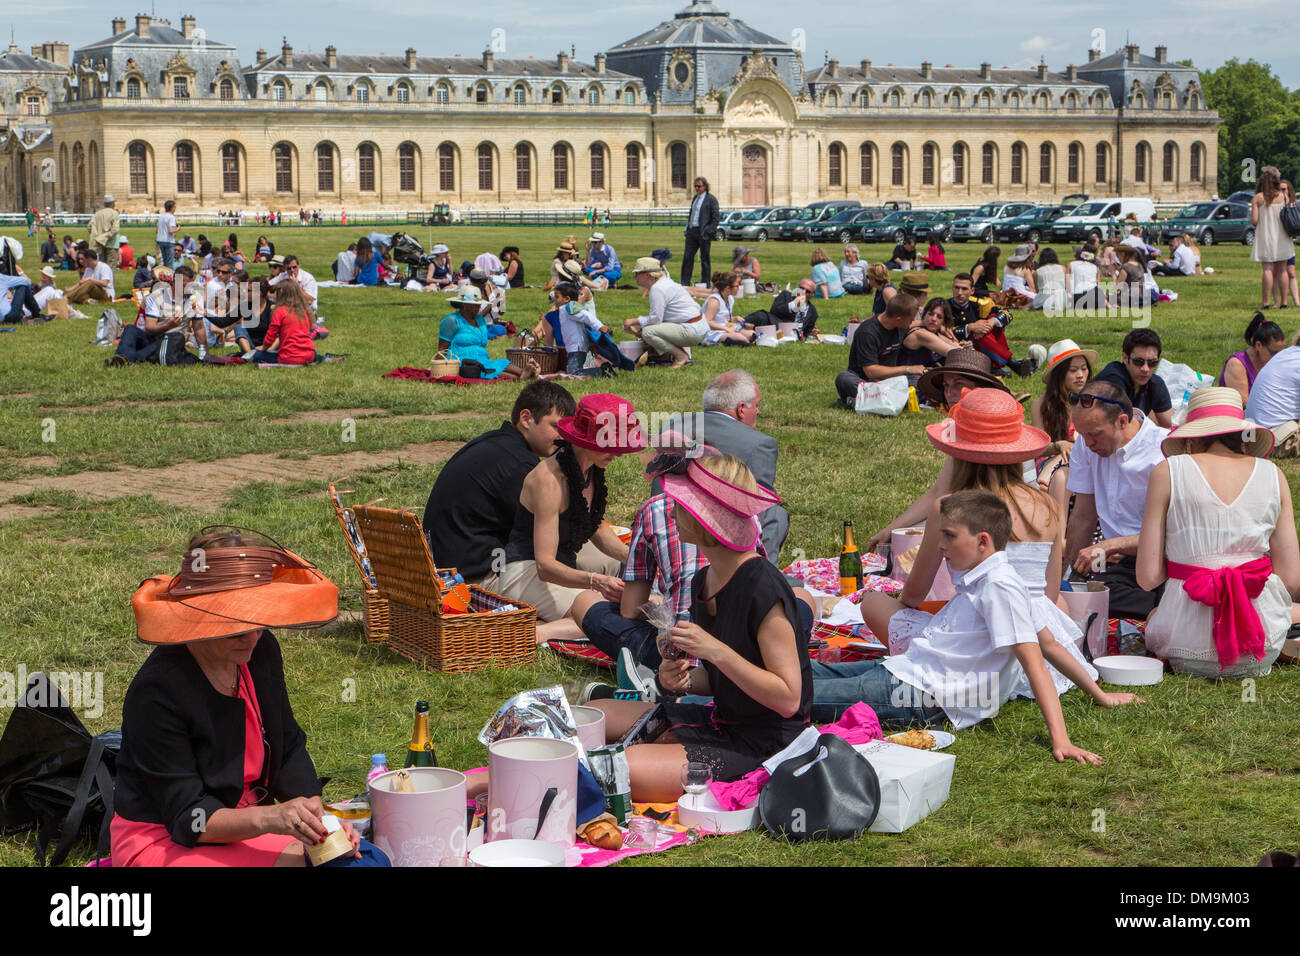 ELEGANT WOMEN IN HATS AT THE CHIC PICNIC IN THE GARDENS OF DIANE WITH THE BIG STABLES OF THE CHATEAU DE CHANTILLY IN THE BACKGROUND, 2013 PRIX DE DIANE LONGINES, CHANTILLY RACECOURSE, OISE (60), FRANCE Stock Photo